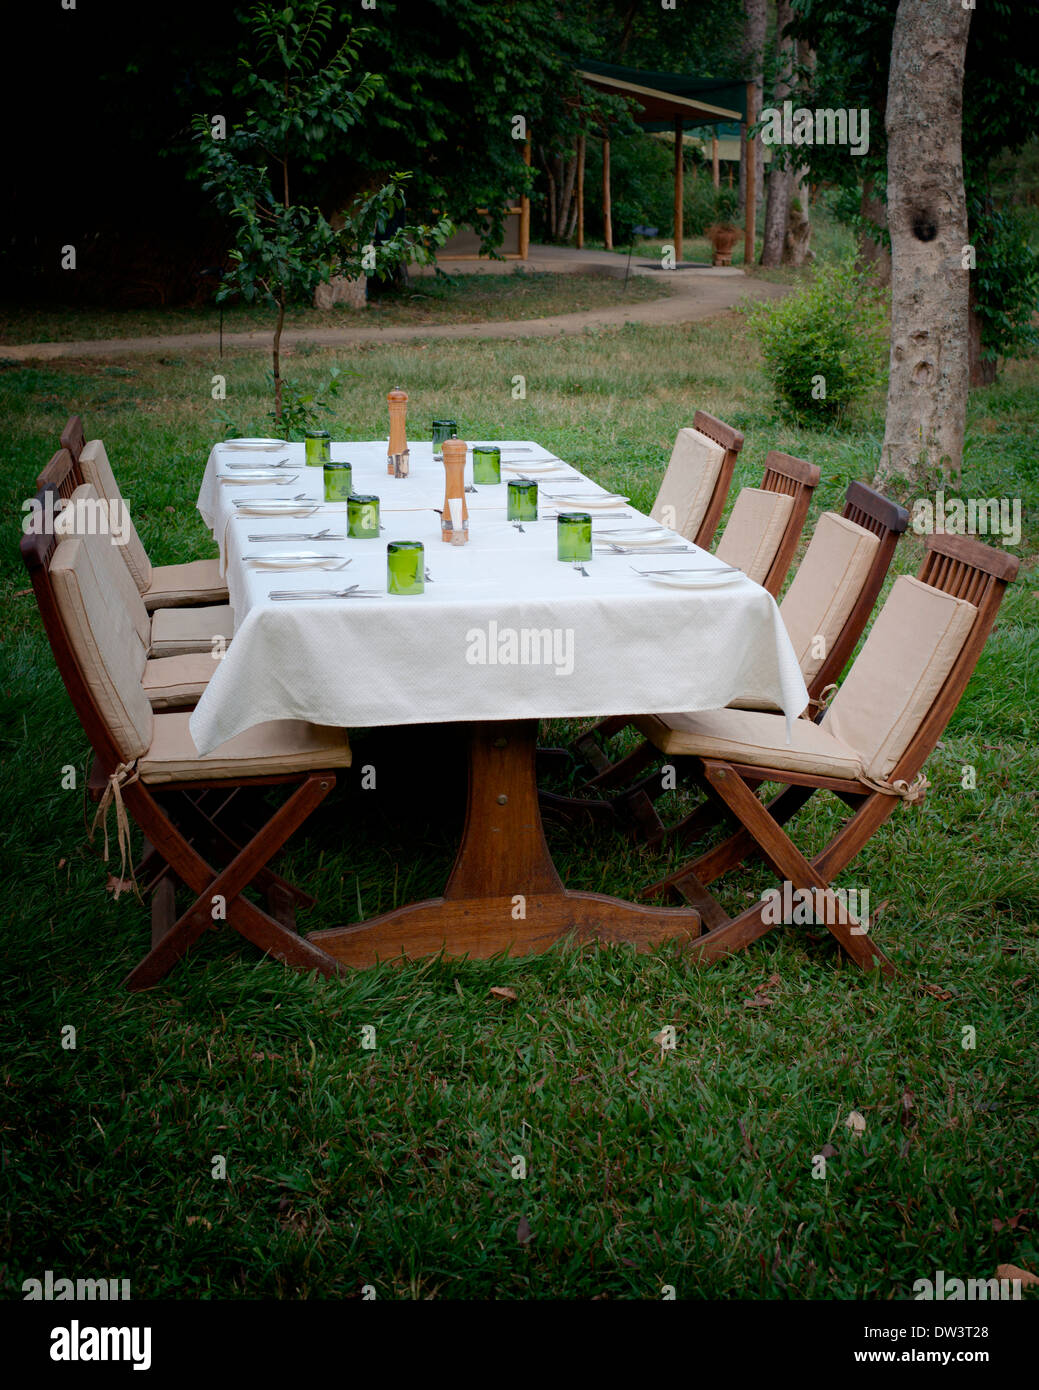 Al Fresco Dining - Seating for eight 8 outdoors in the Ugandan evening in a grassy area. Stock Photo